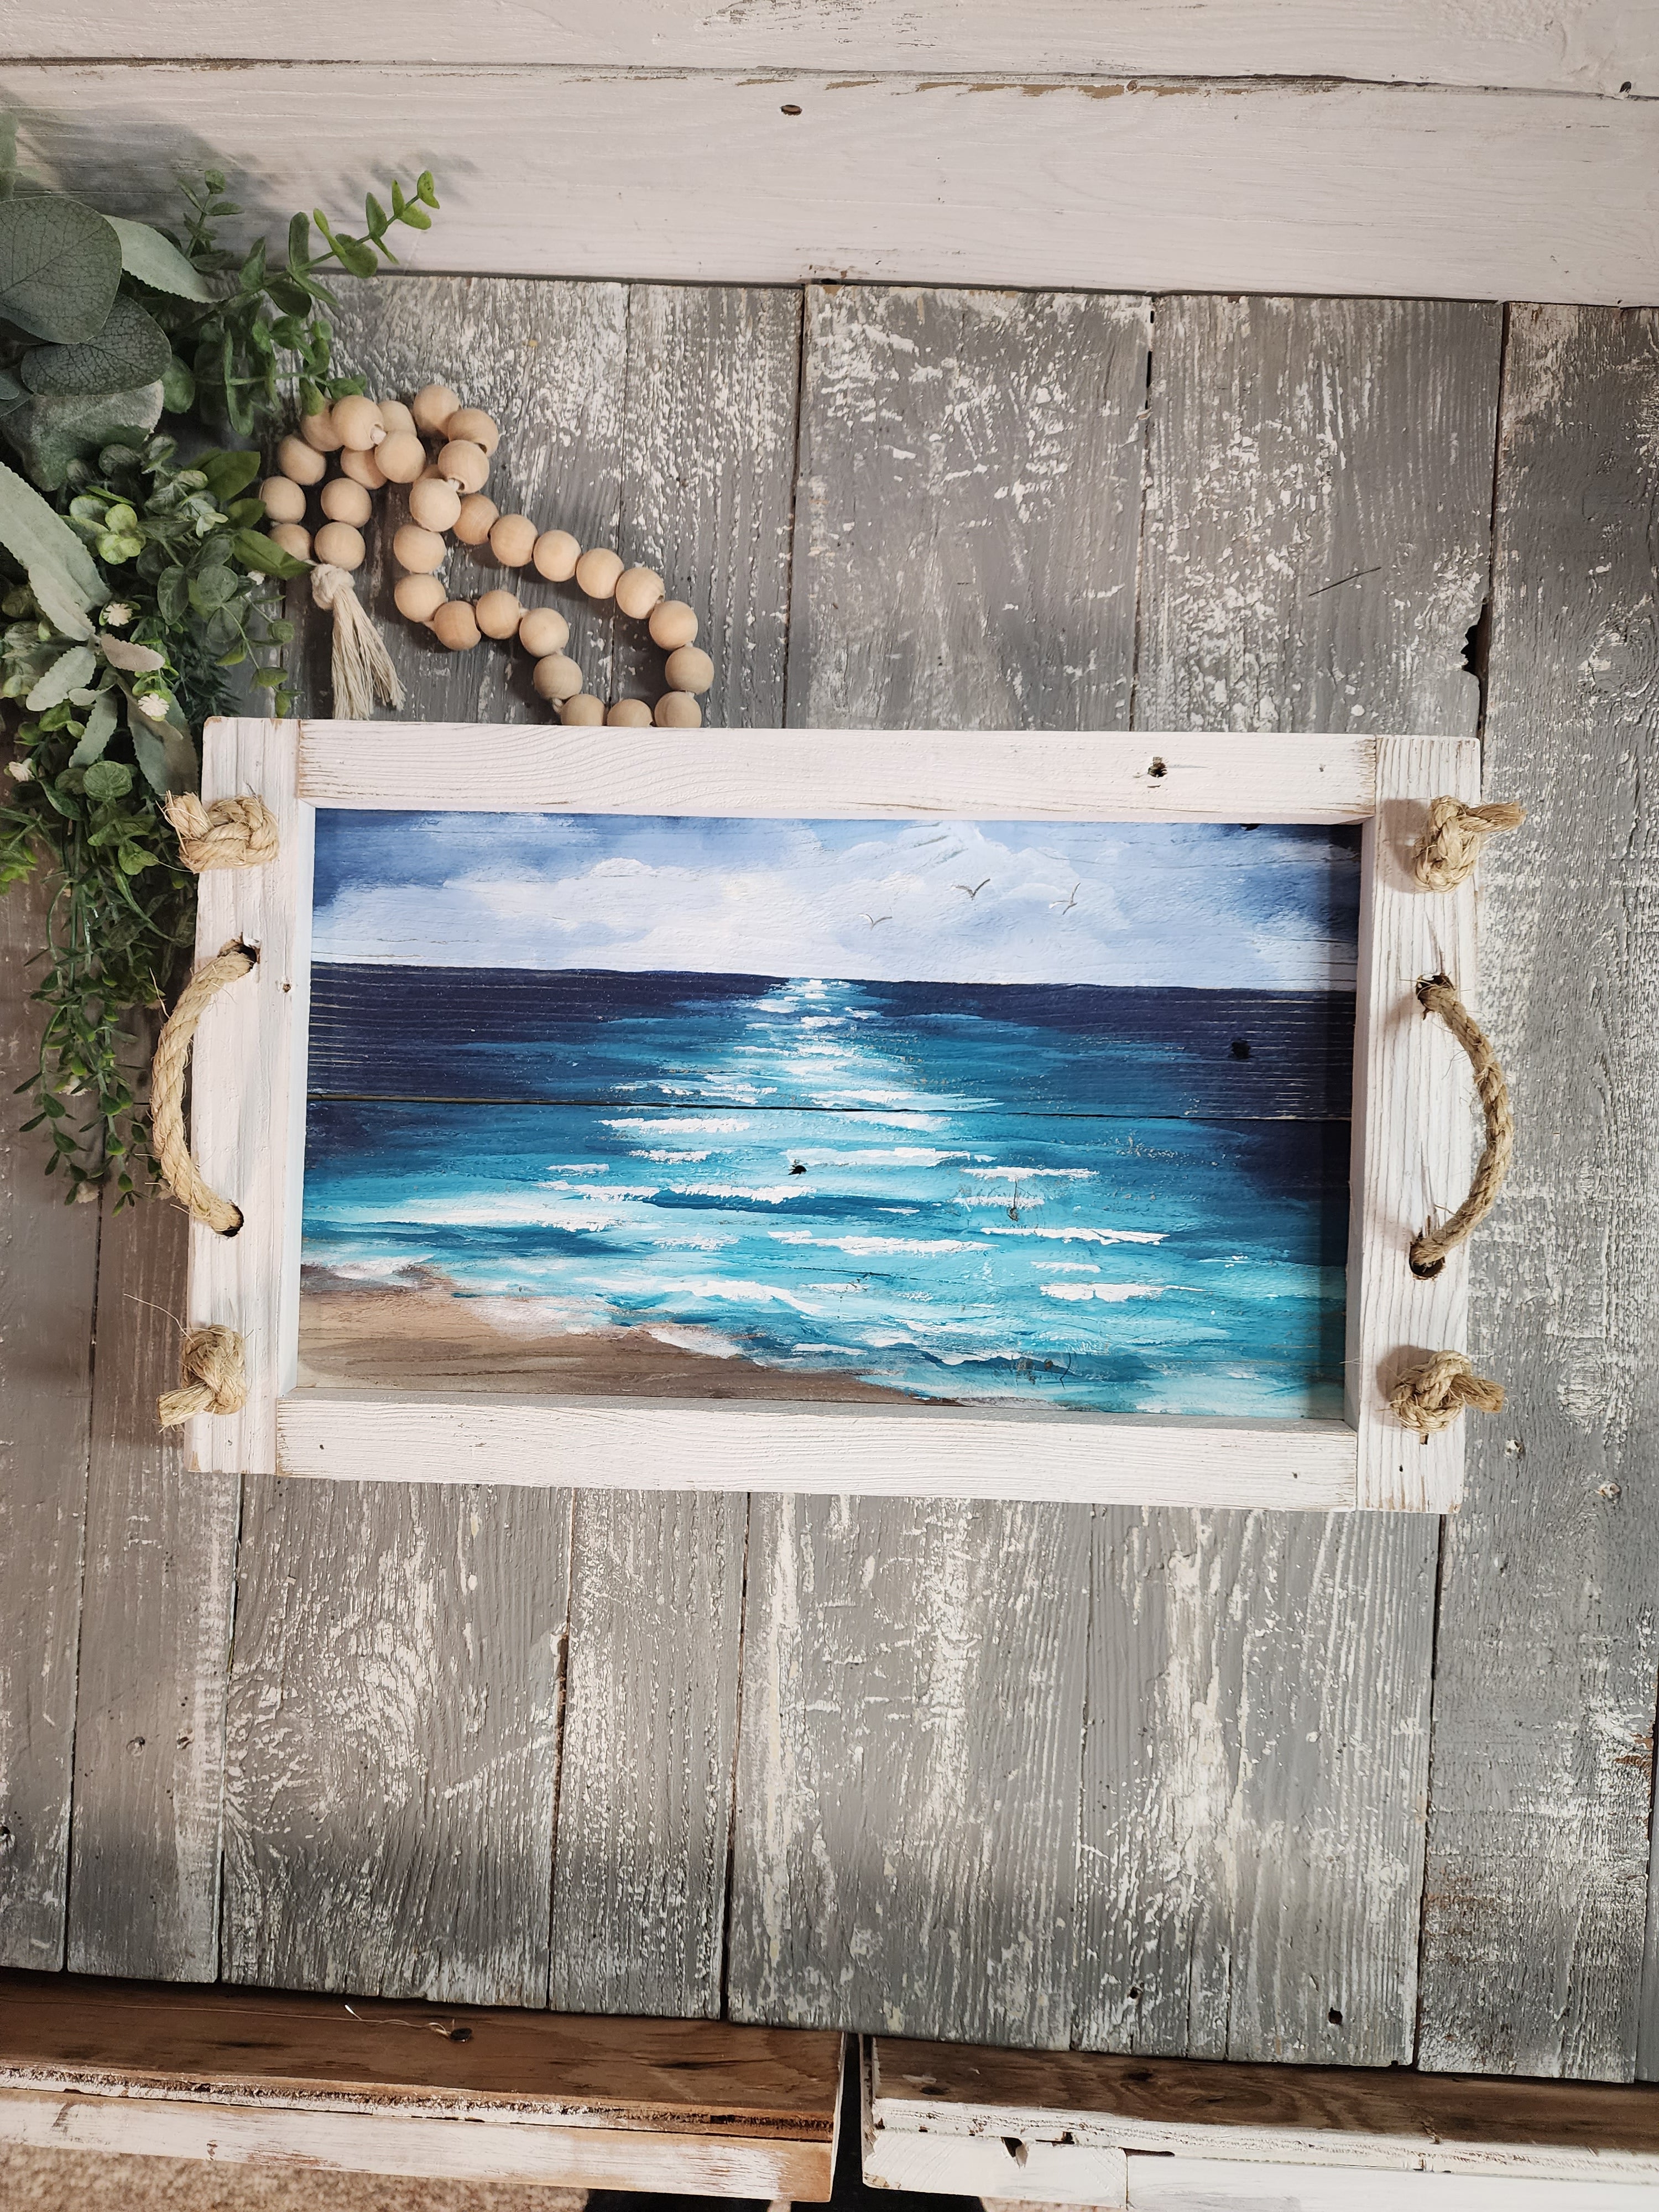 Coastal and Lake Art Serving Trays, Hometown Pride, Vacation Gifts